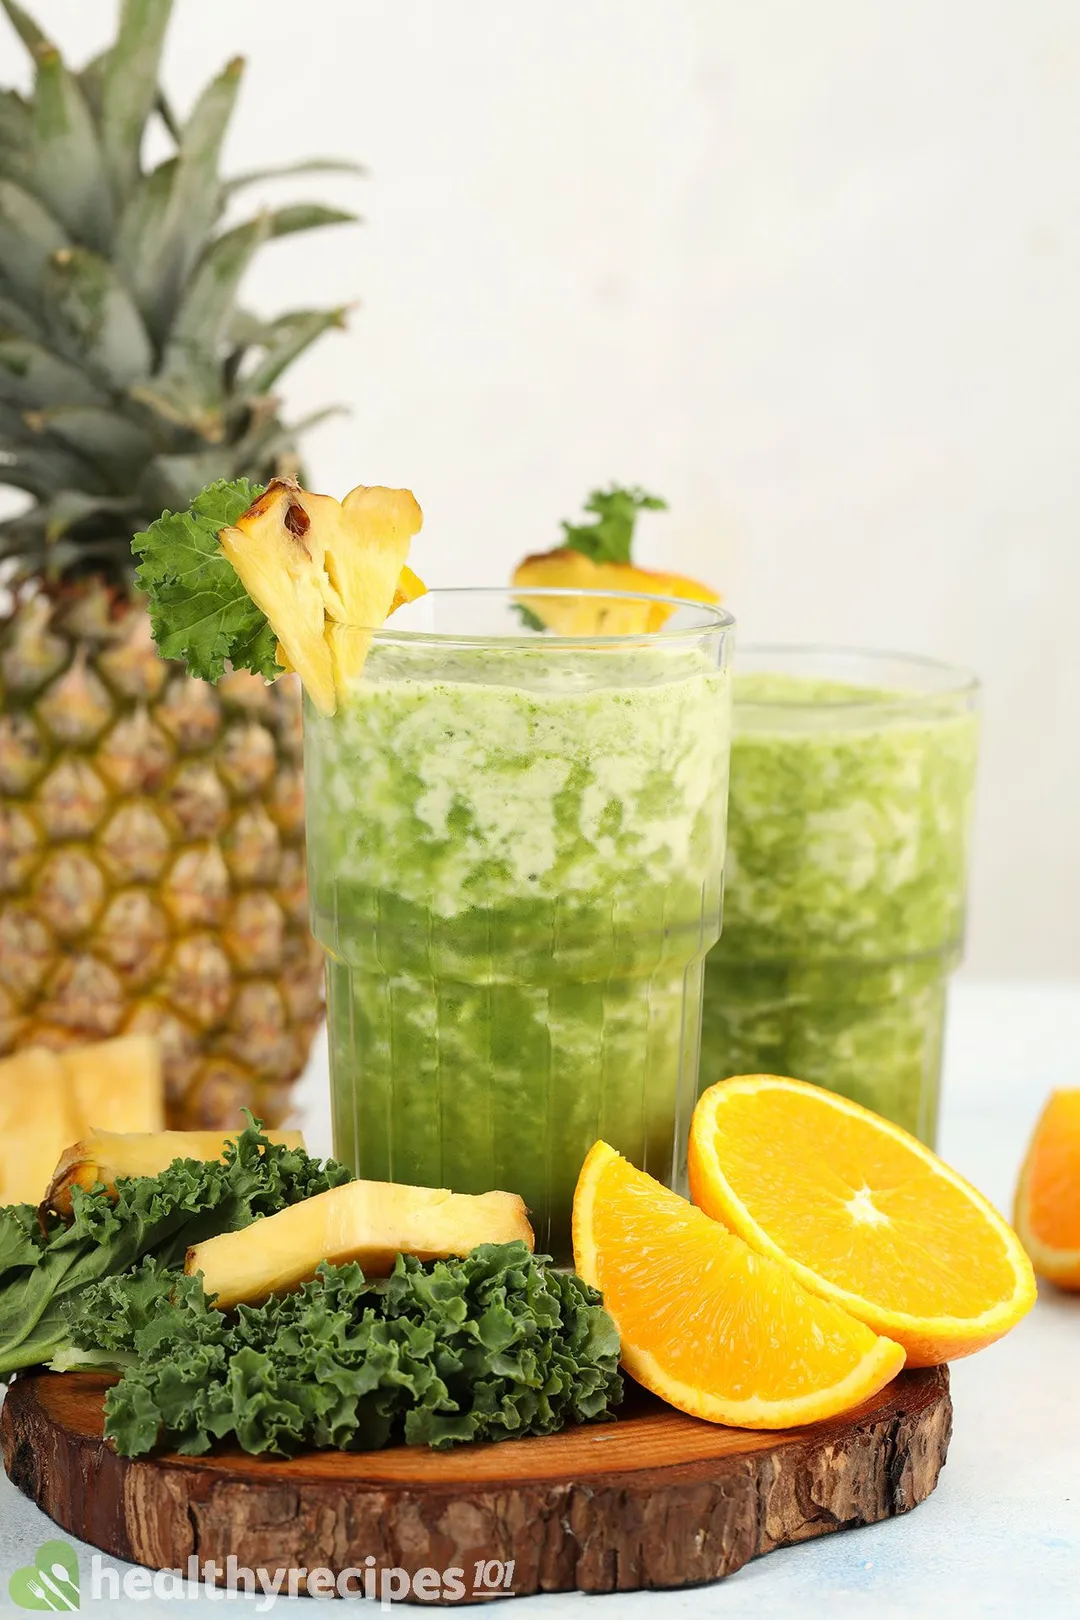 Two glasses of Pineapple Kale Smoothie placed on a wooden board near slices of orange, kale leaves, and a pineapple.